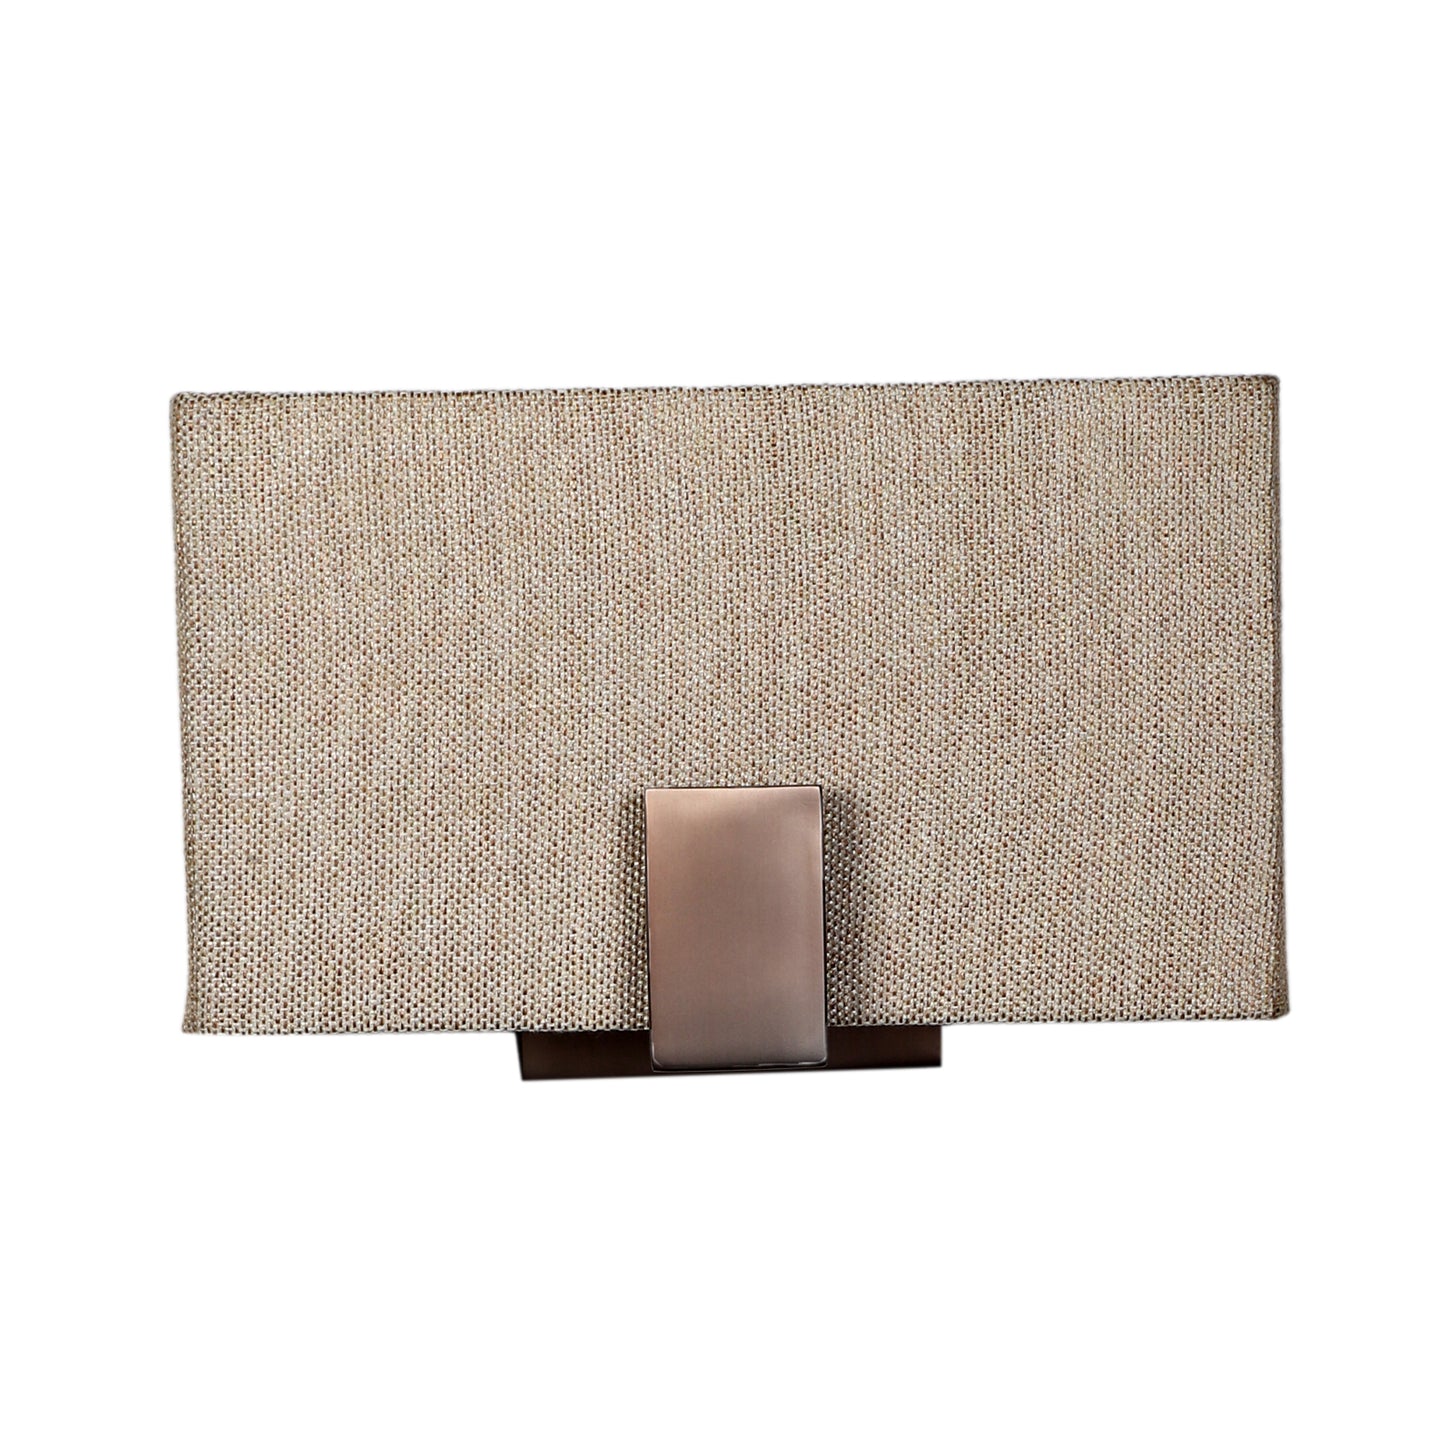 Thick L shape wall light (Rose gold)